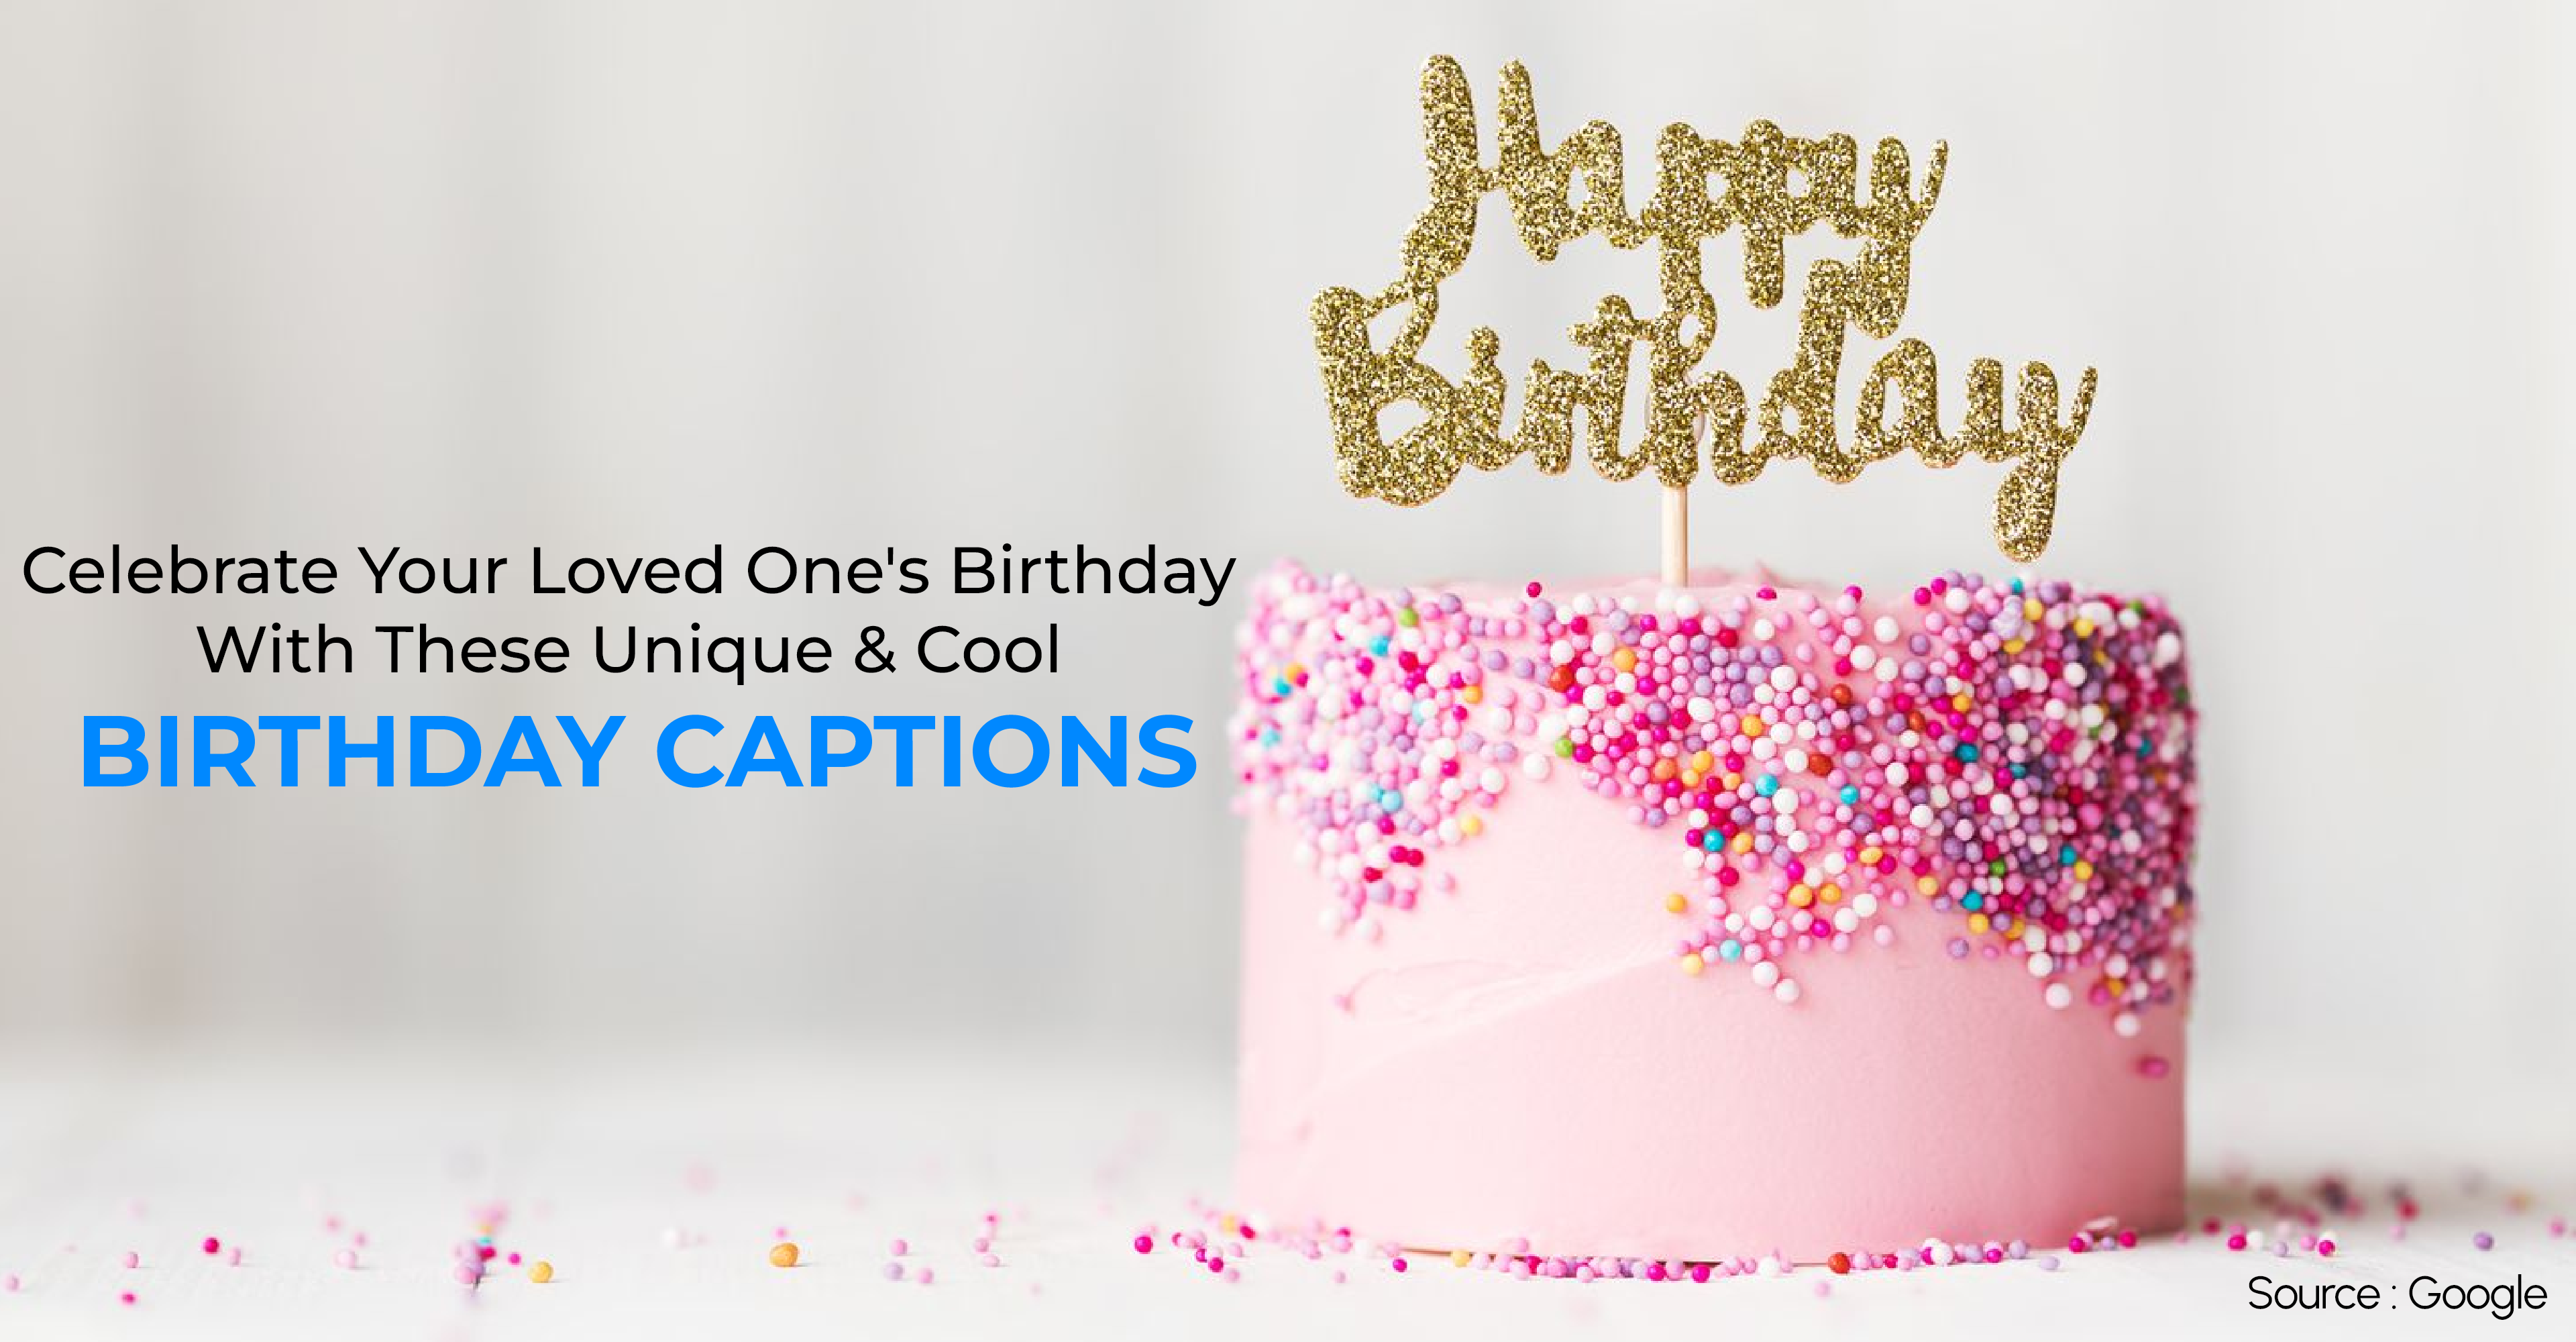 Celebrate Your Loved One's Birthday With These Unique & Cool Birthday Captions